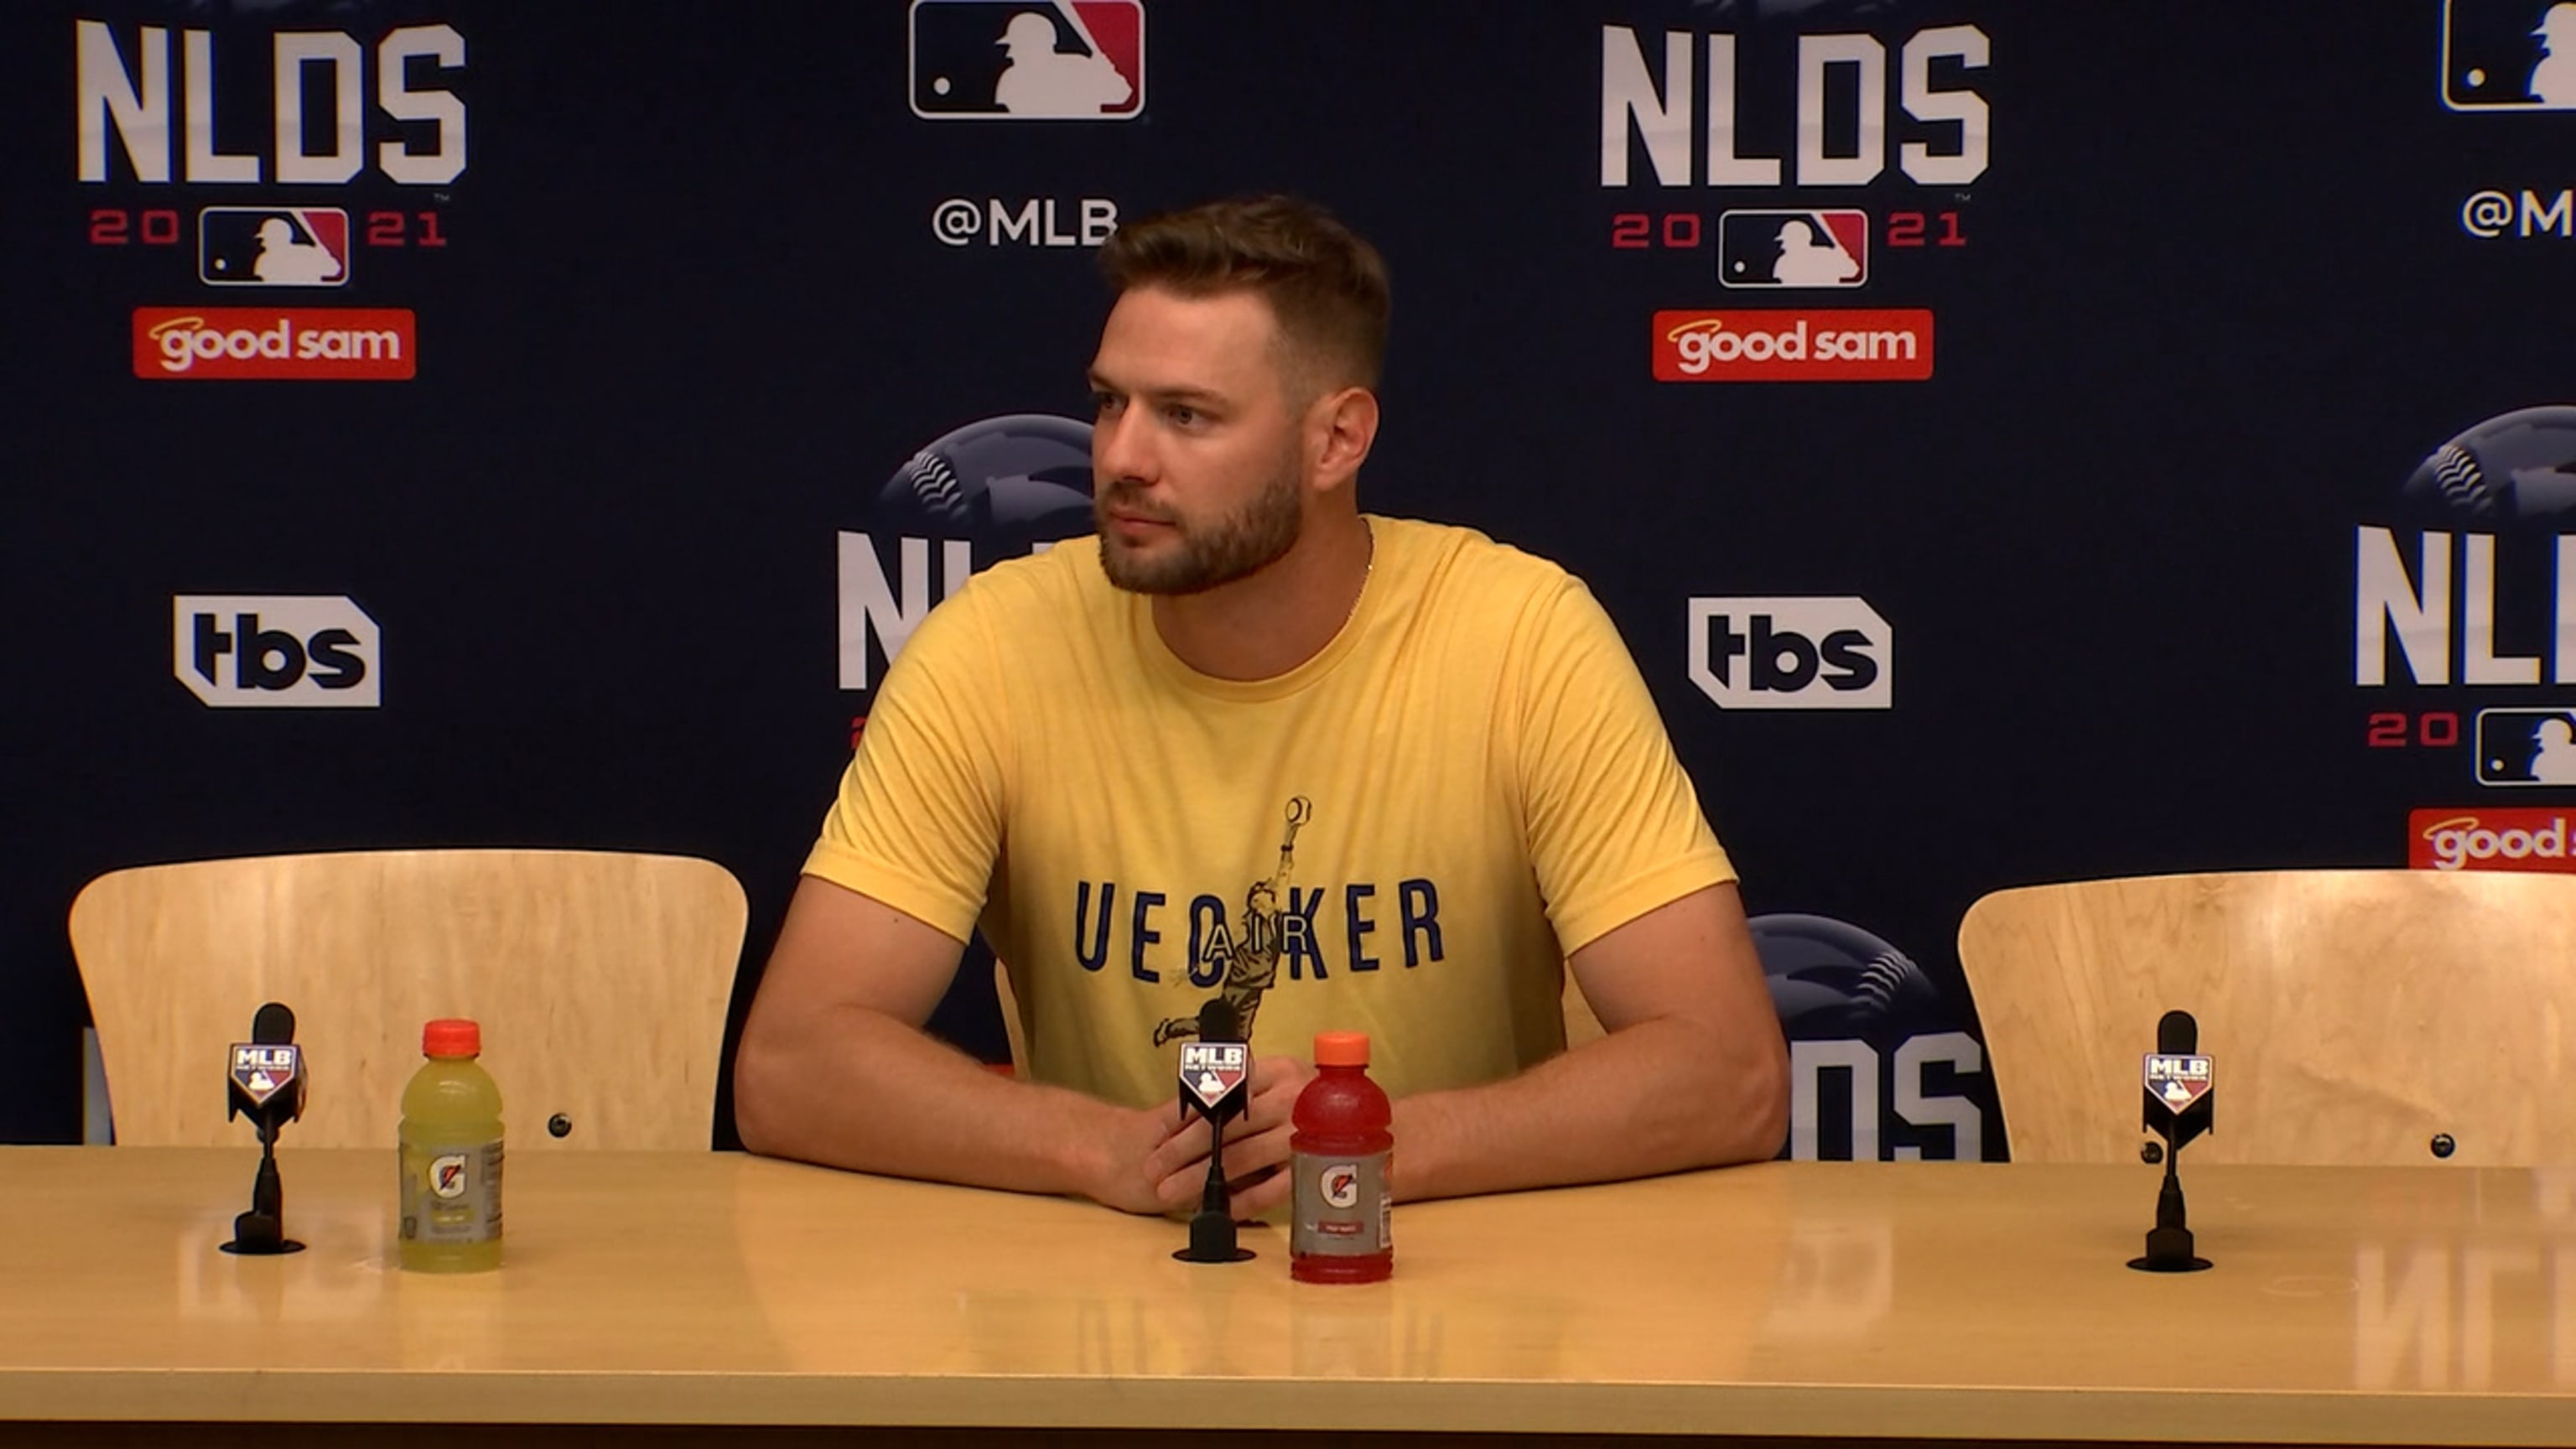 Corbin Burnes was easy choice for Brewers to start Game 1 of the NLDS